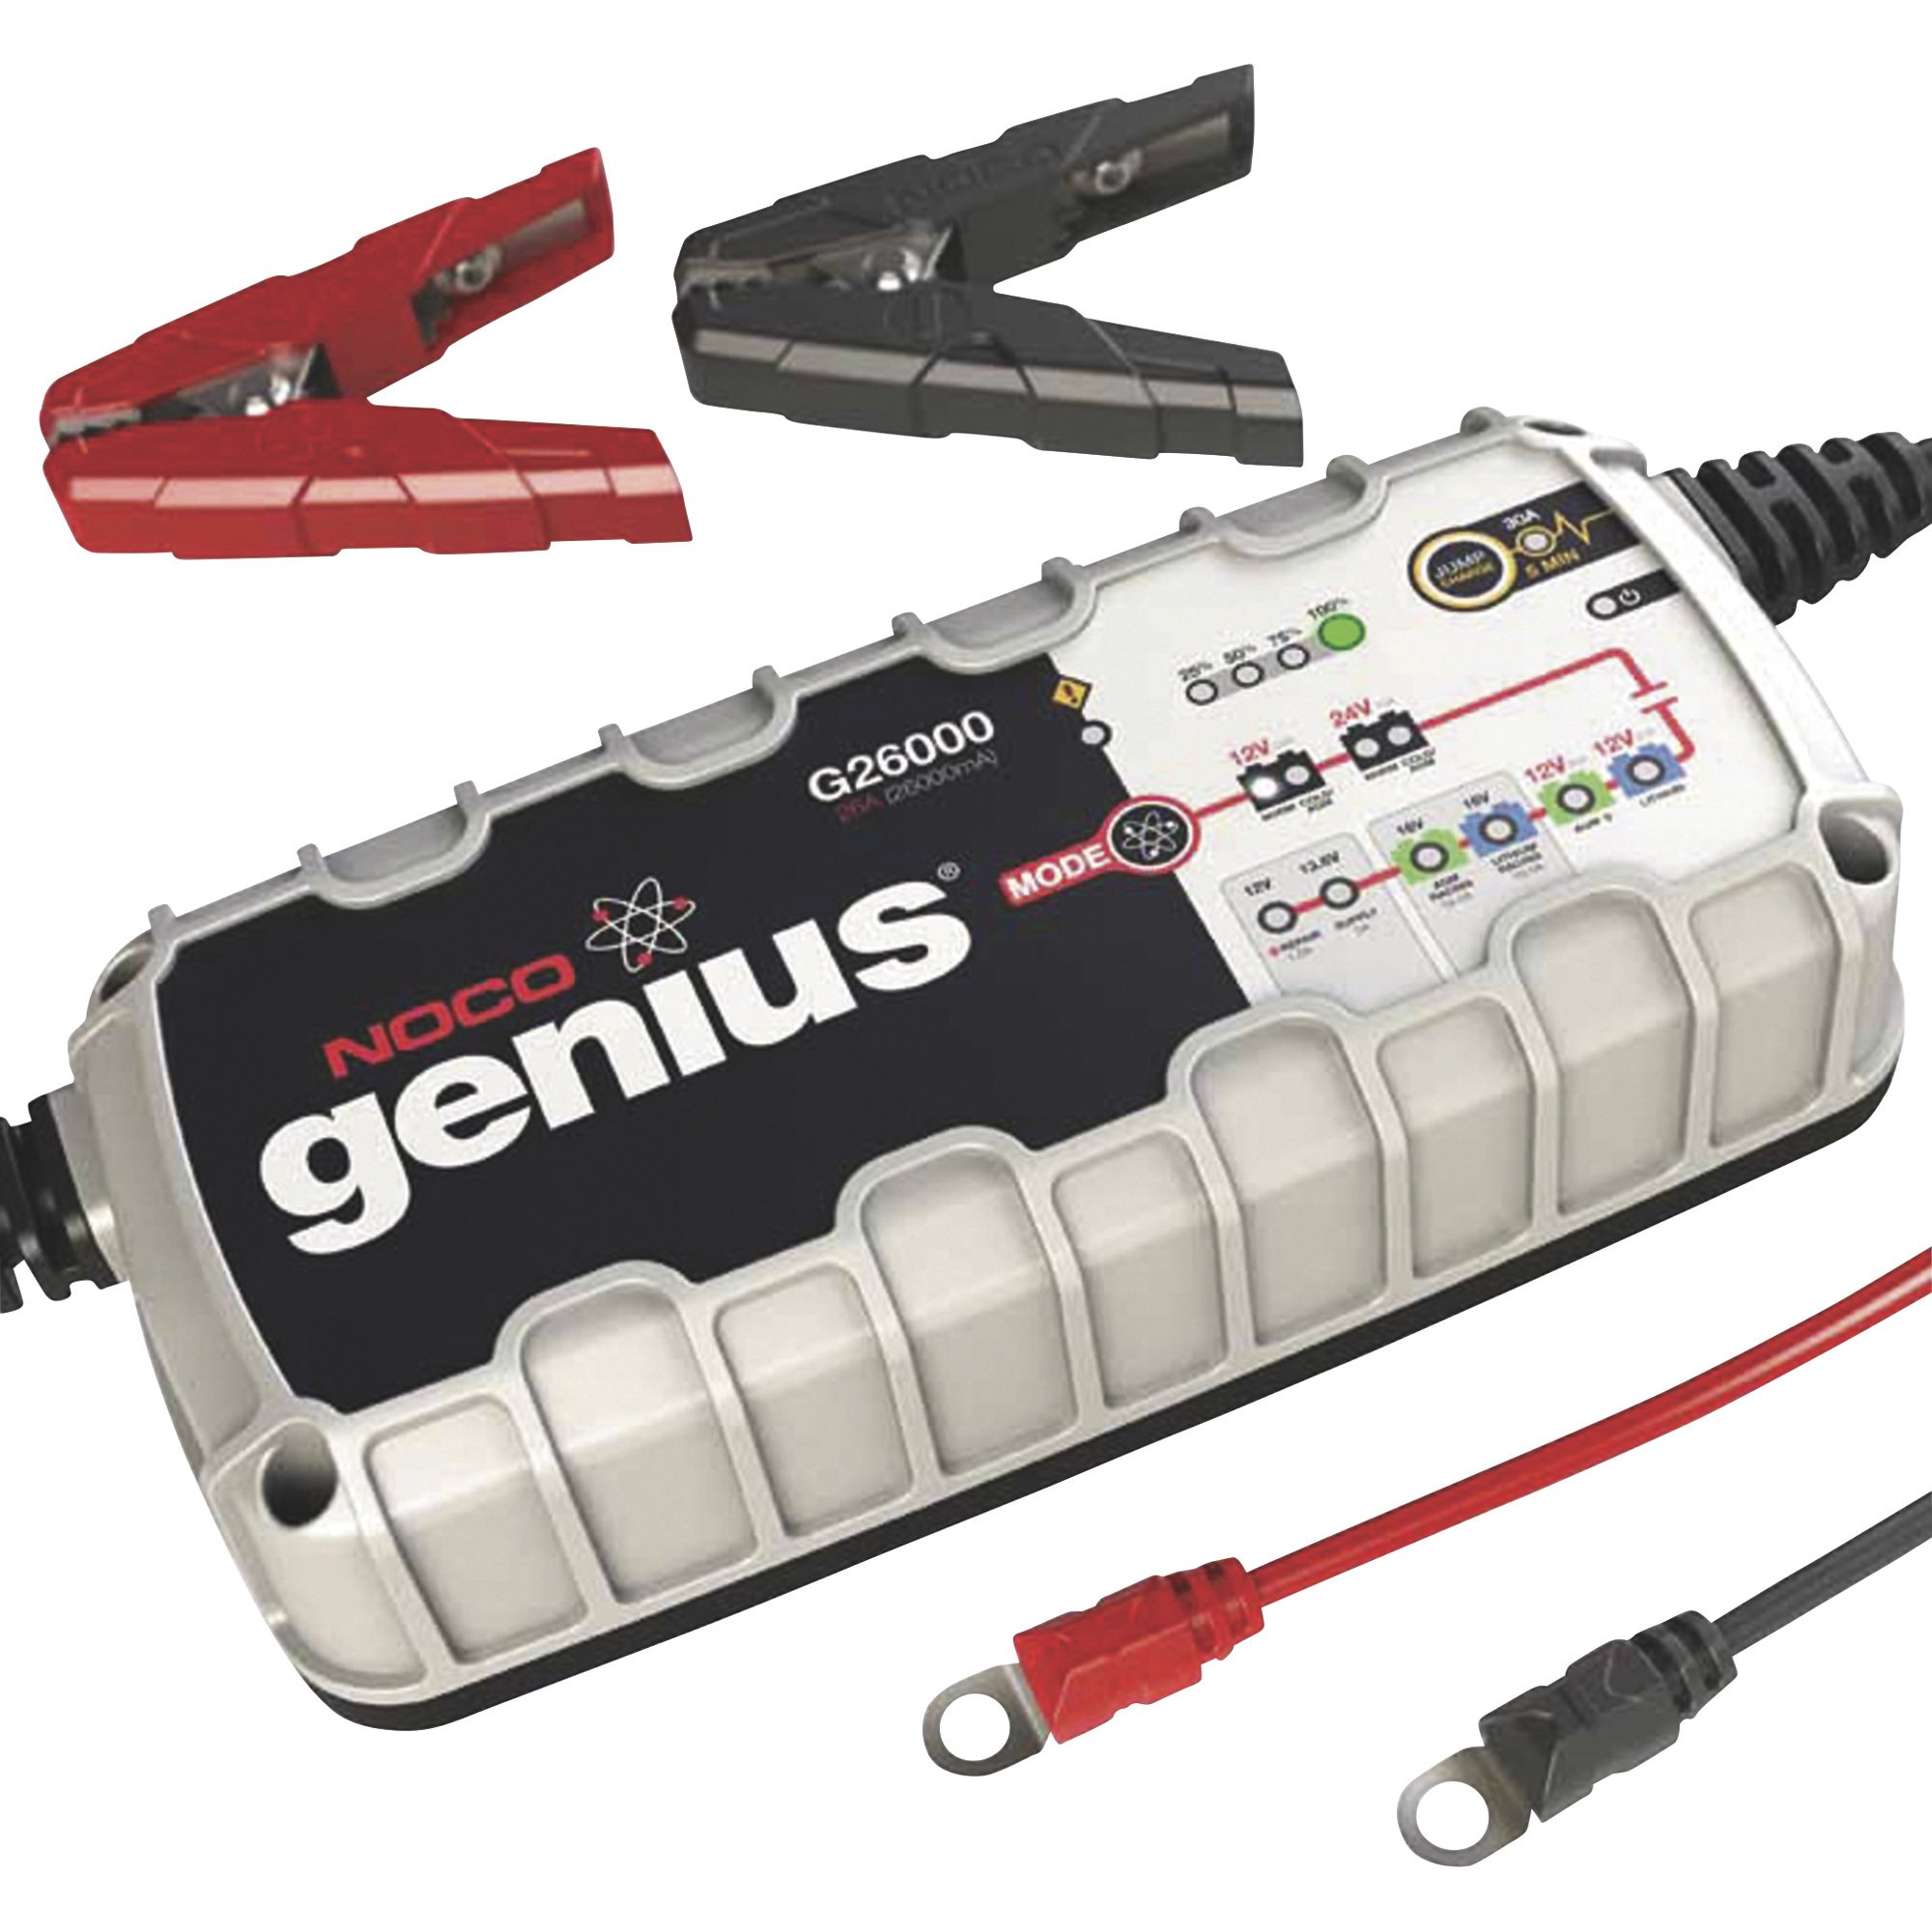 NOCO Genius 5 Charger - No Lift Install System